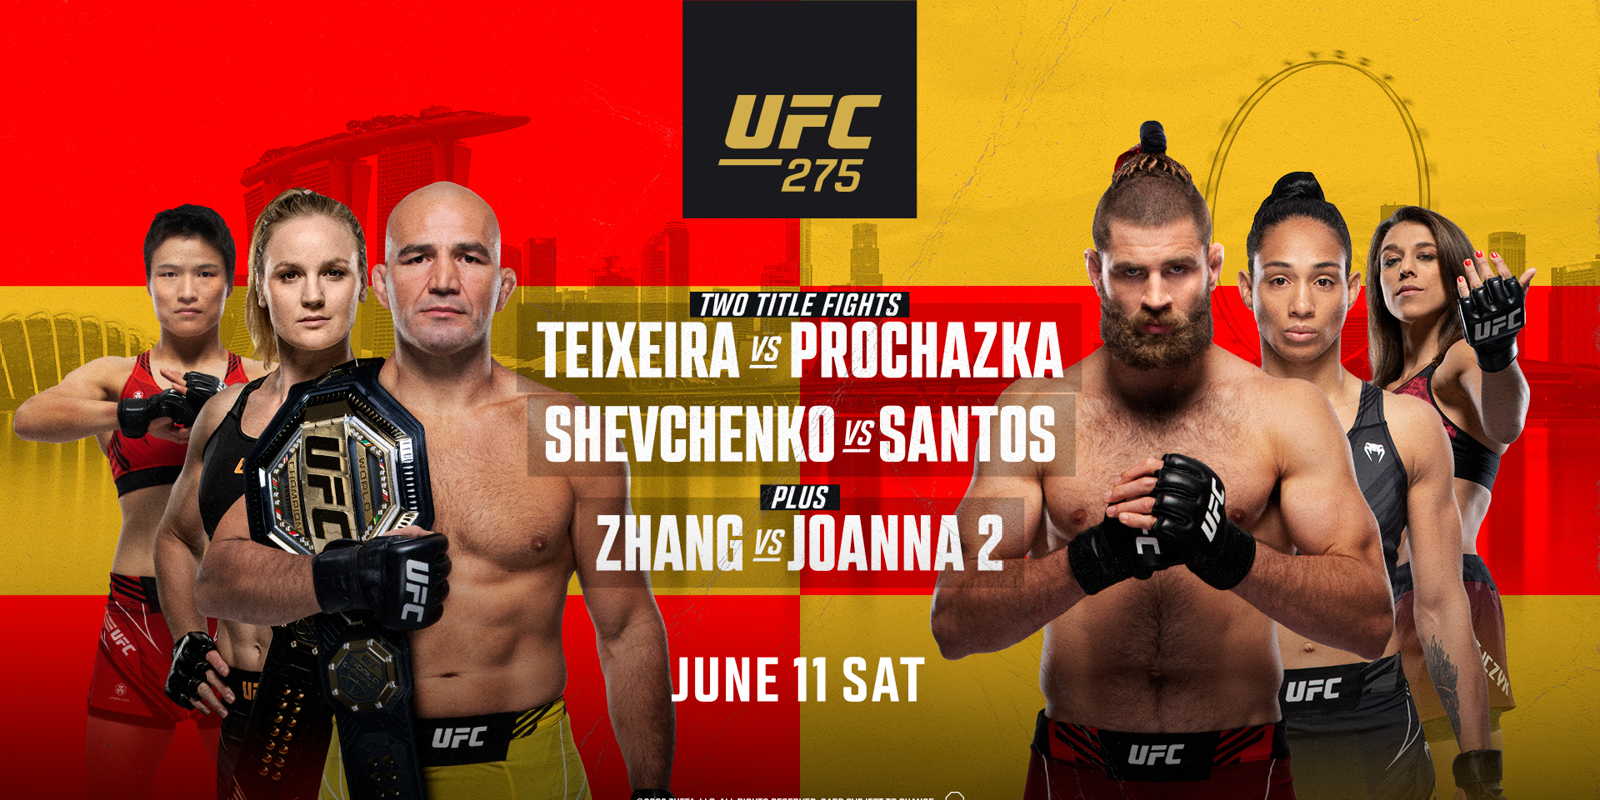 UFC 275 viewing visual for chickie's & pete's showing 6 fighters